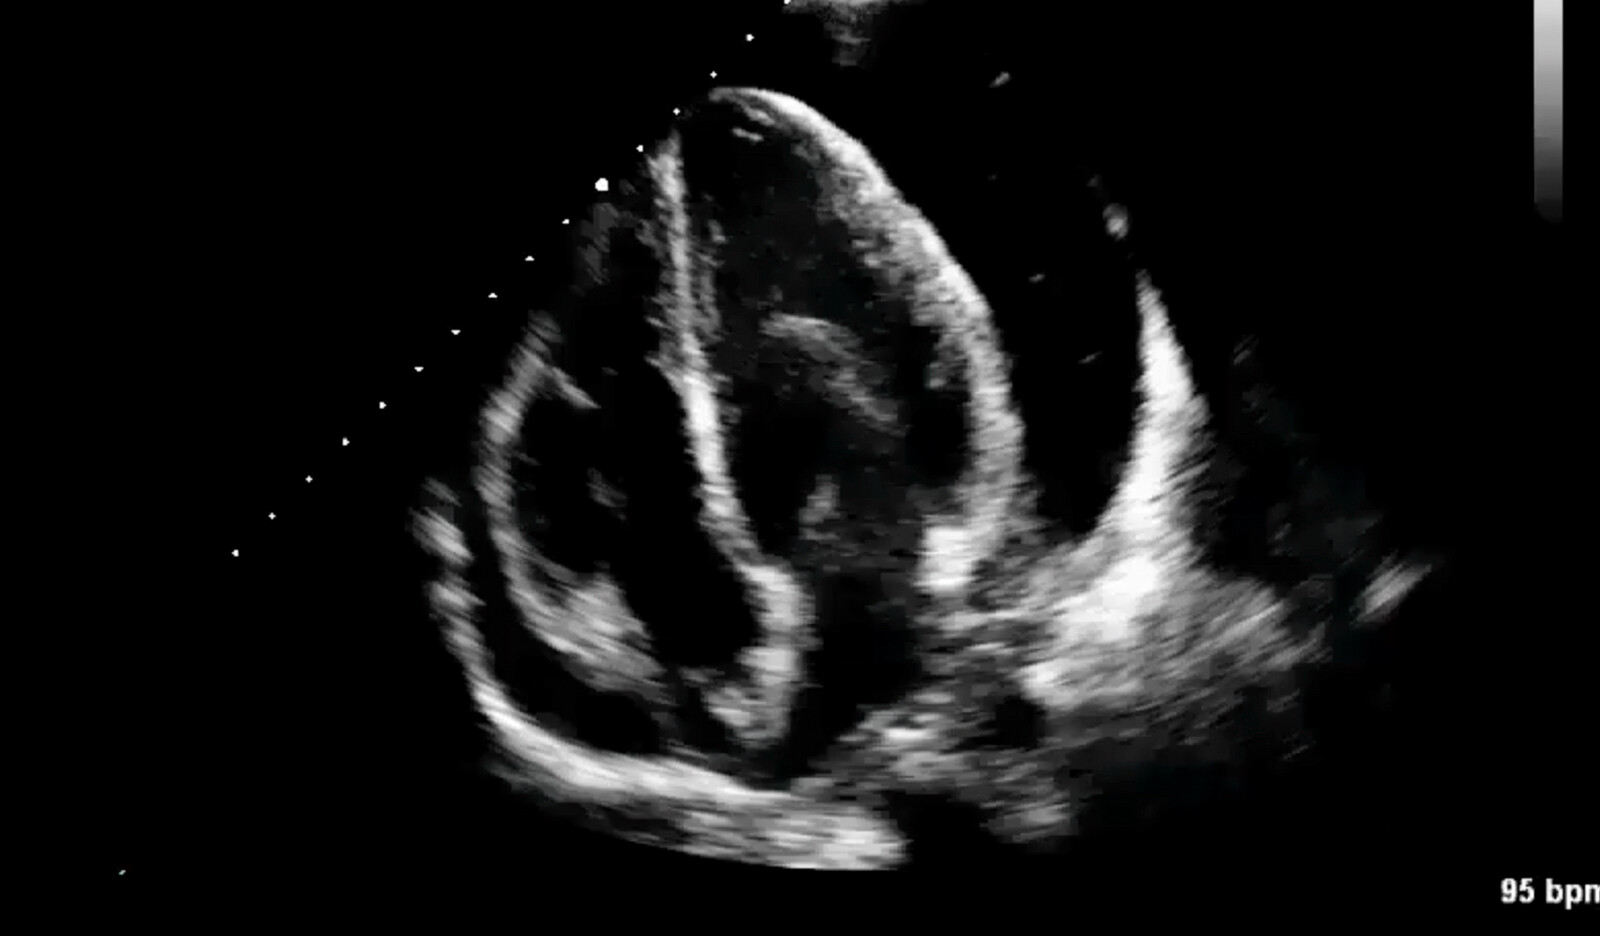 Image of valve replacement strain echocardiography congenital cardiac abnormality cardiac damage bicuspid aortic valve AVR aortic valve replacement aortic stenosis    Online PoCUS Training